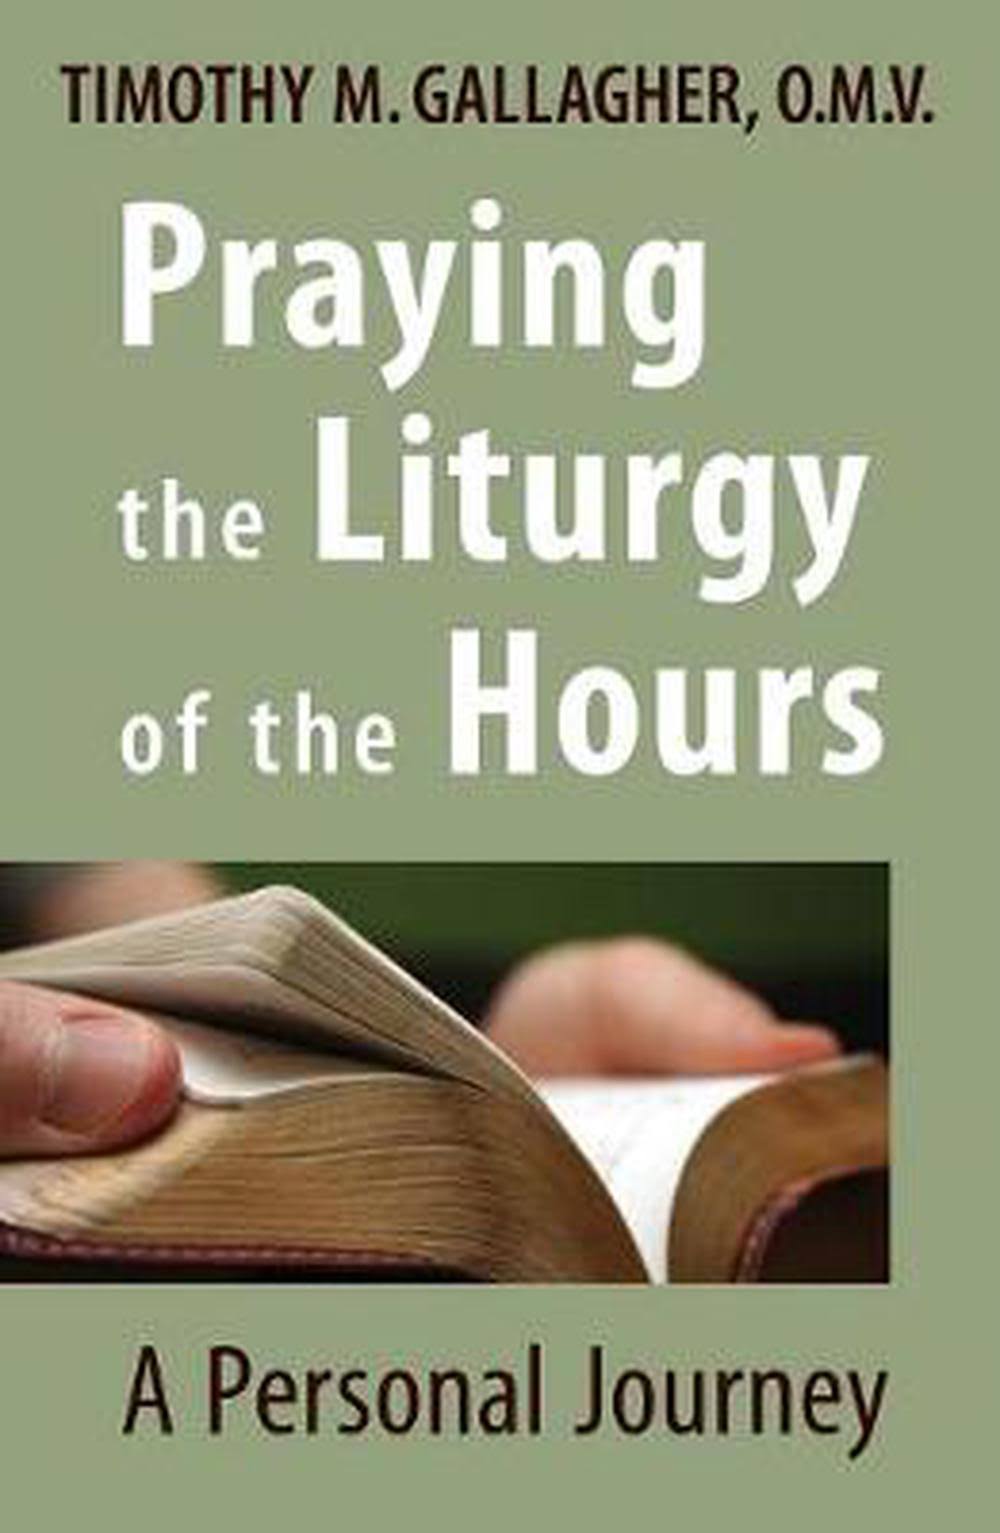 Praying the Liturgy of the Hours: A Personal Journey - Timothy M. Gallagher